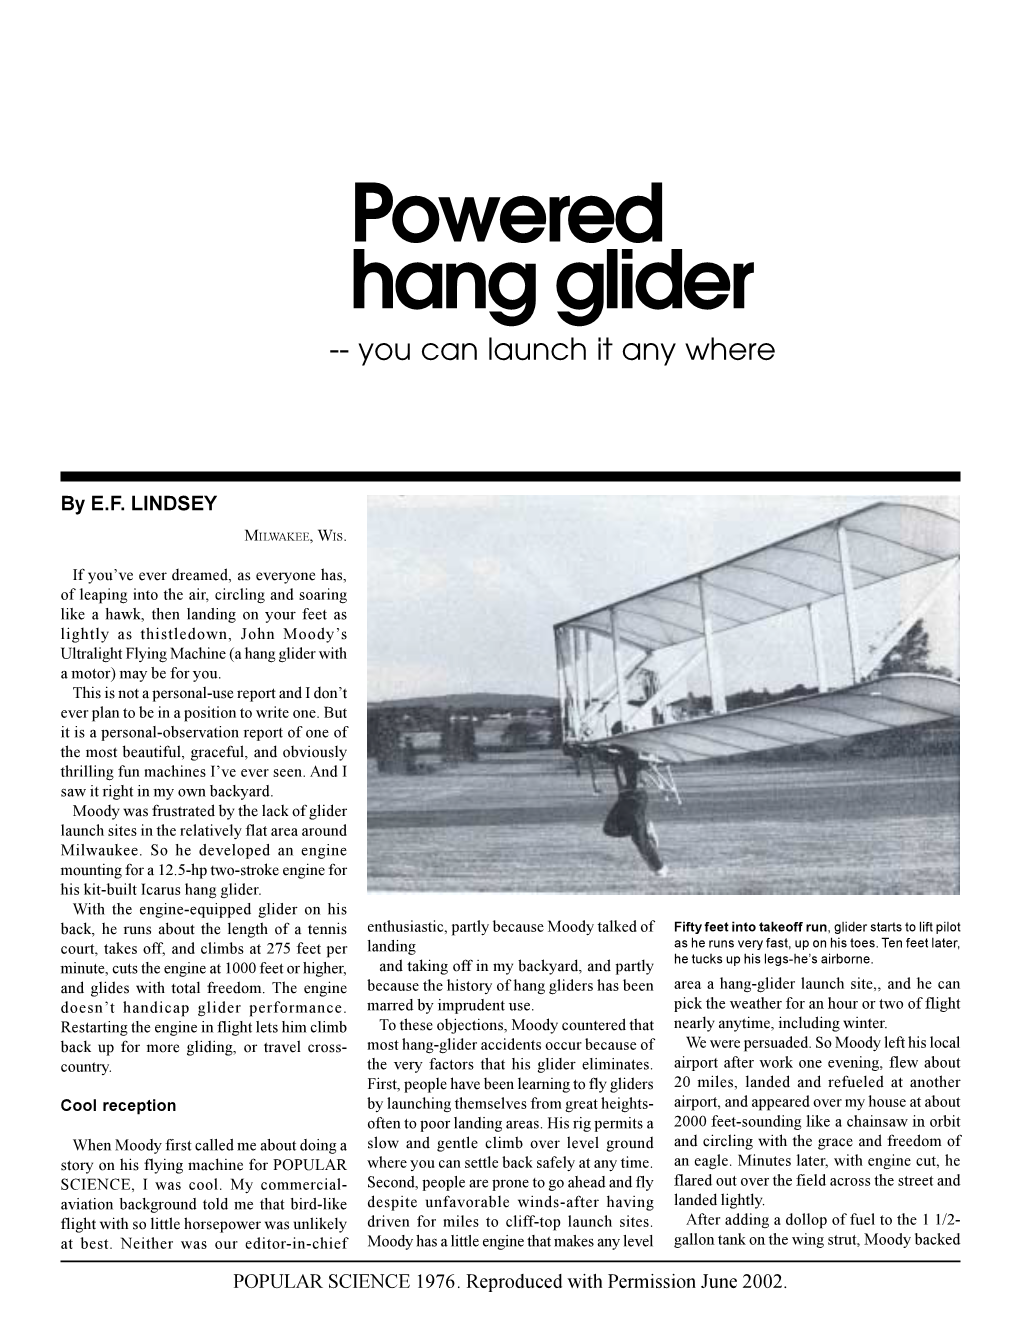 Powered Hang Glider -- You Can Launch It Any Where